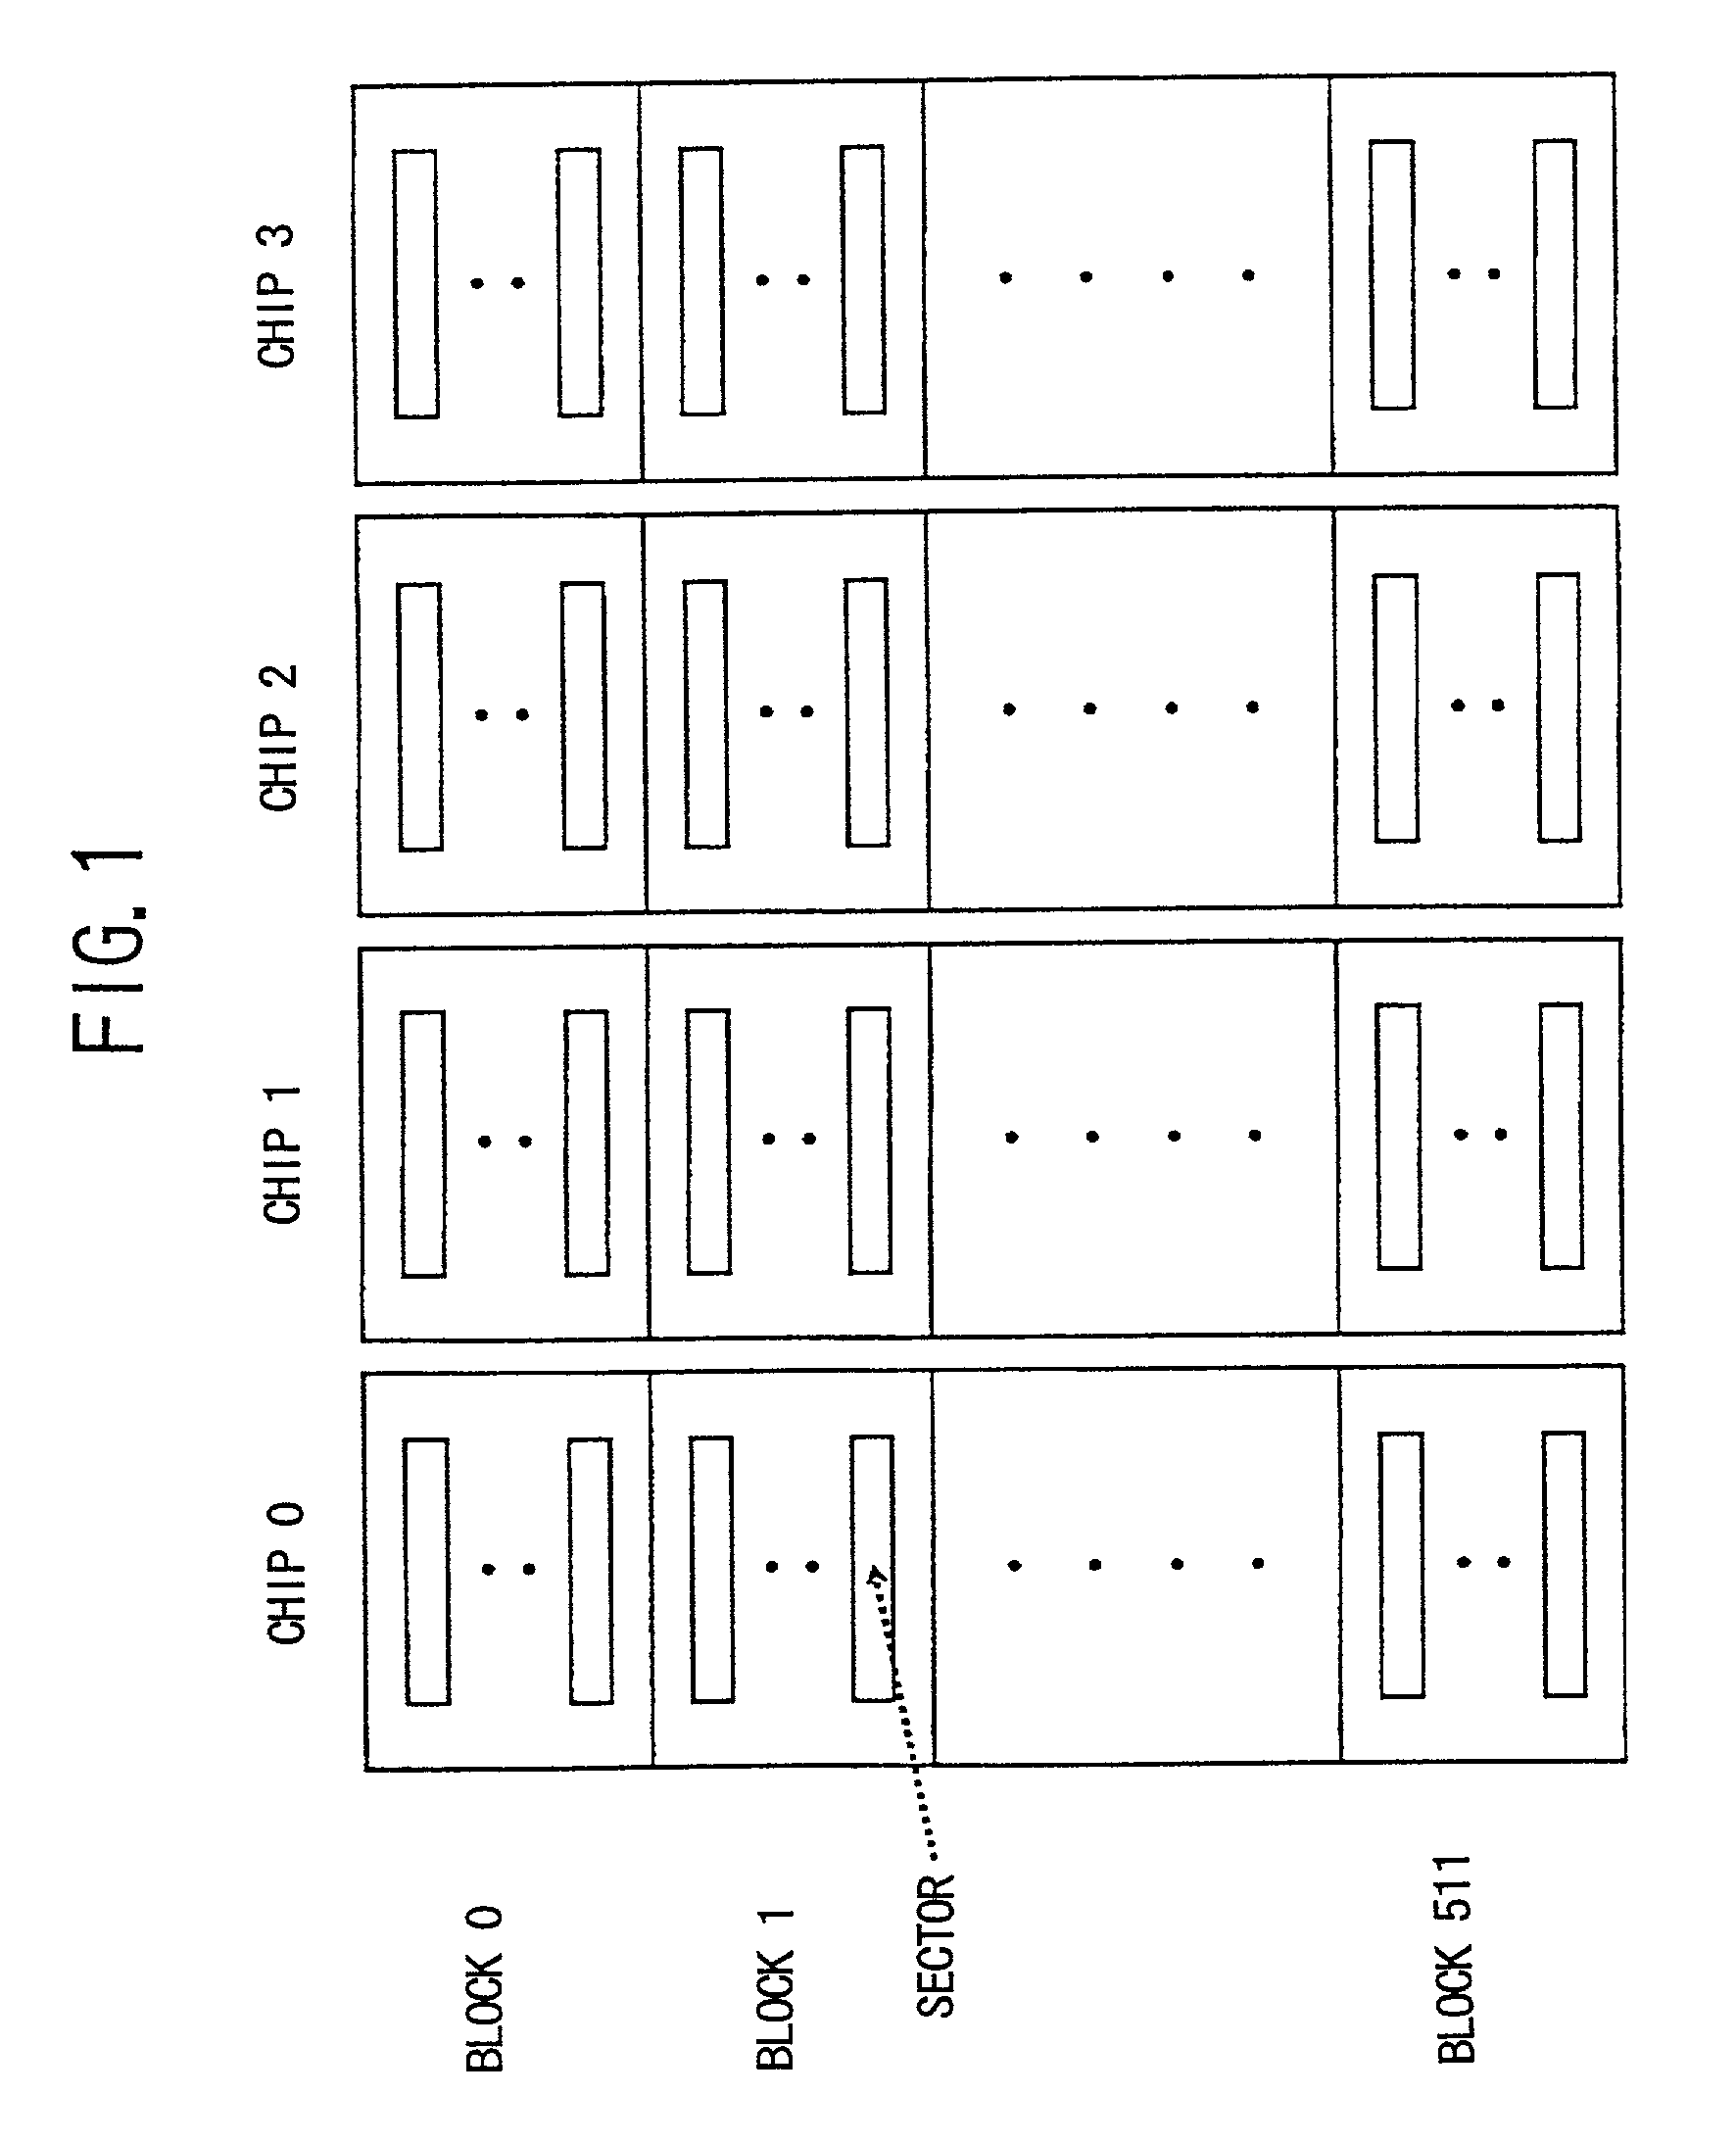 Memory management table producing method and memory device